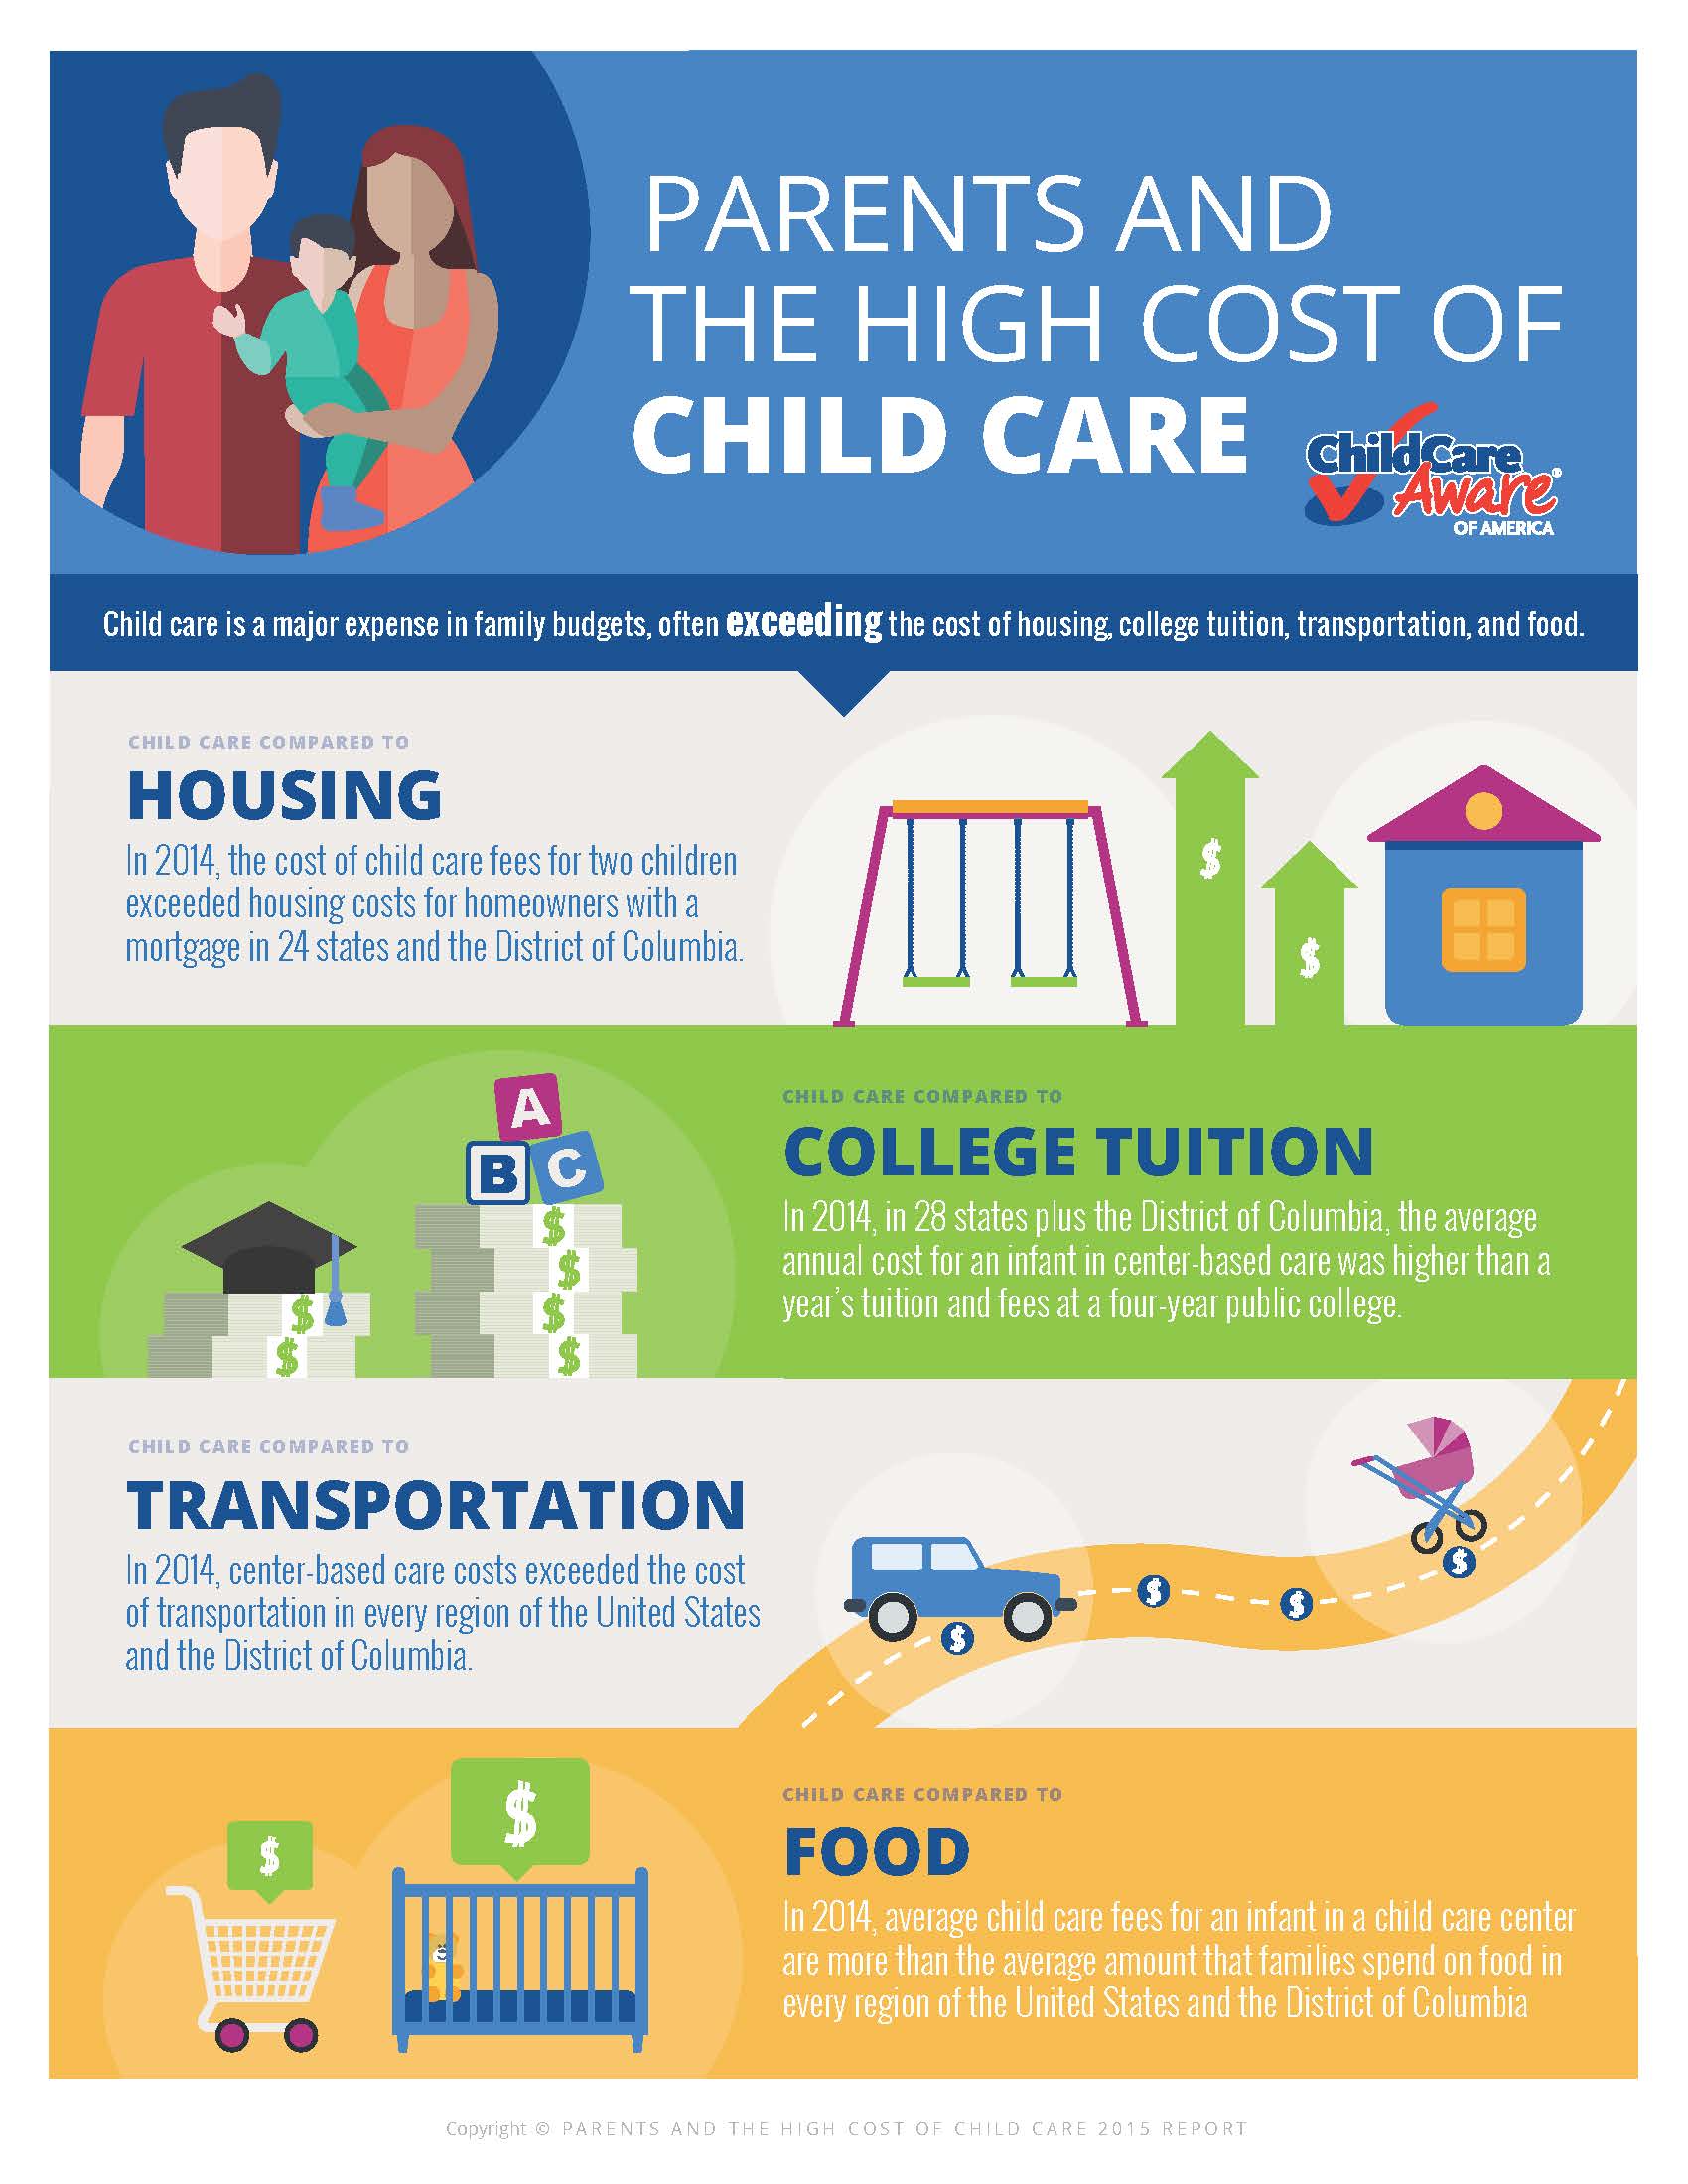 Parents and the High Cost of Child Care 2015 Child Care Aware® of